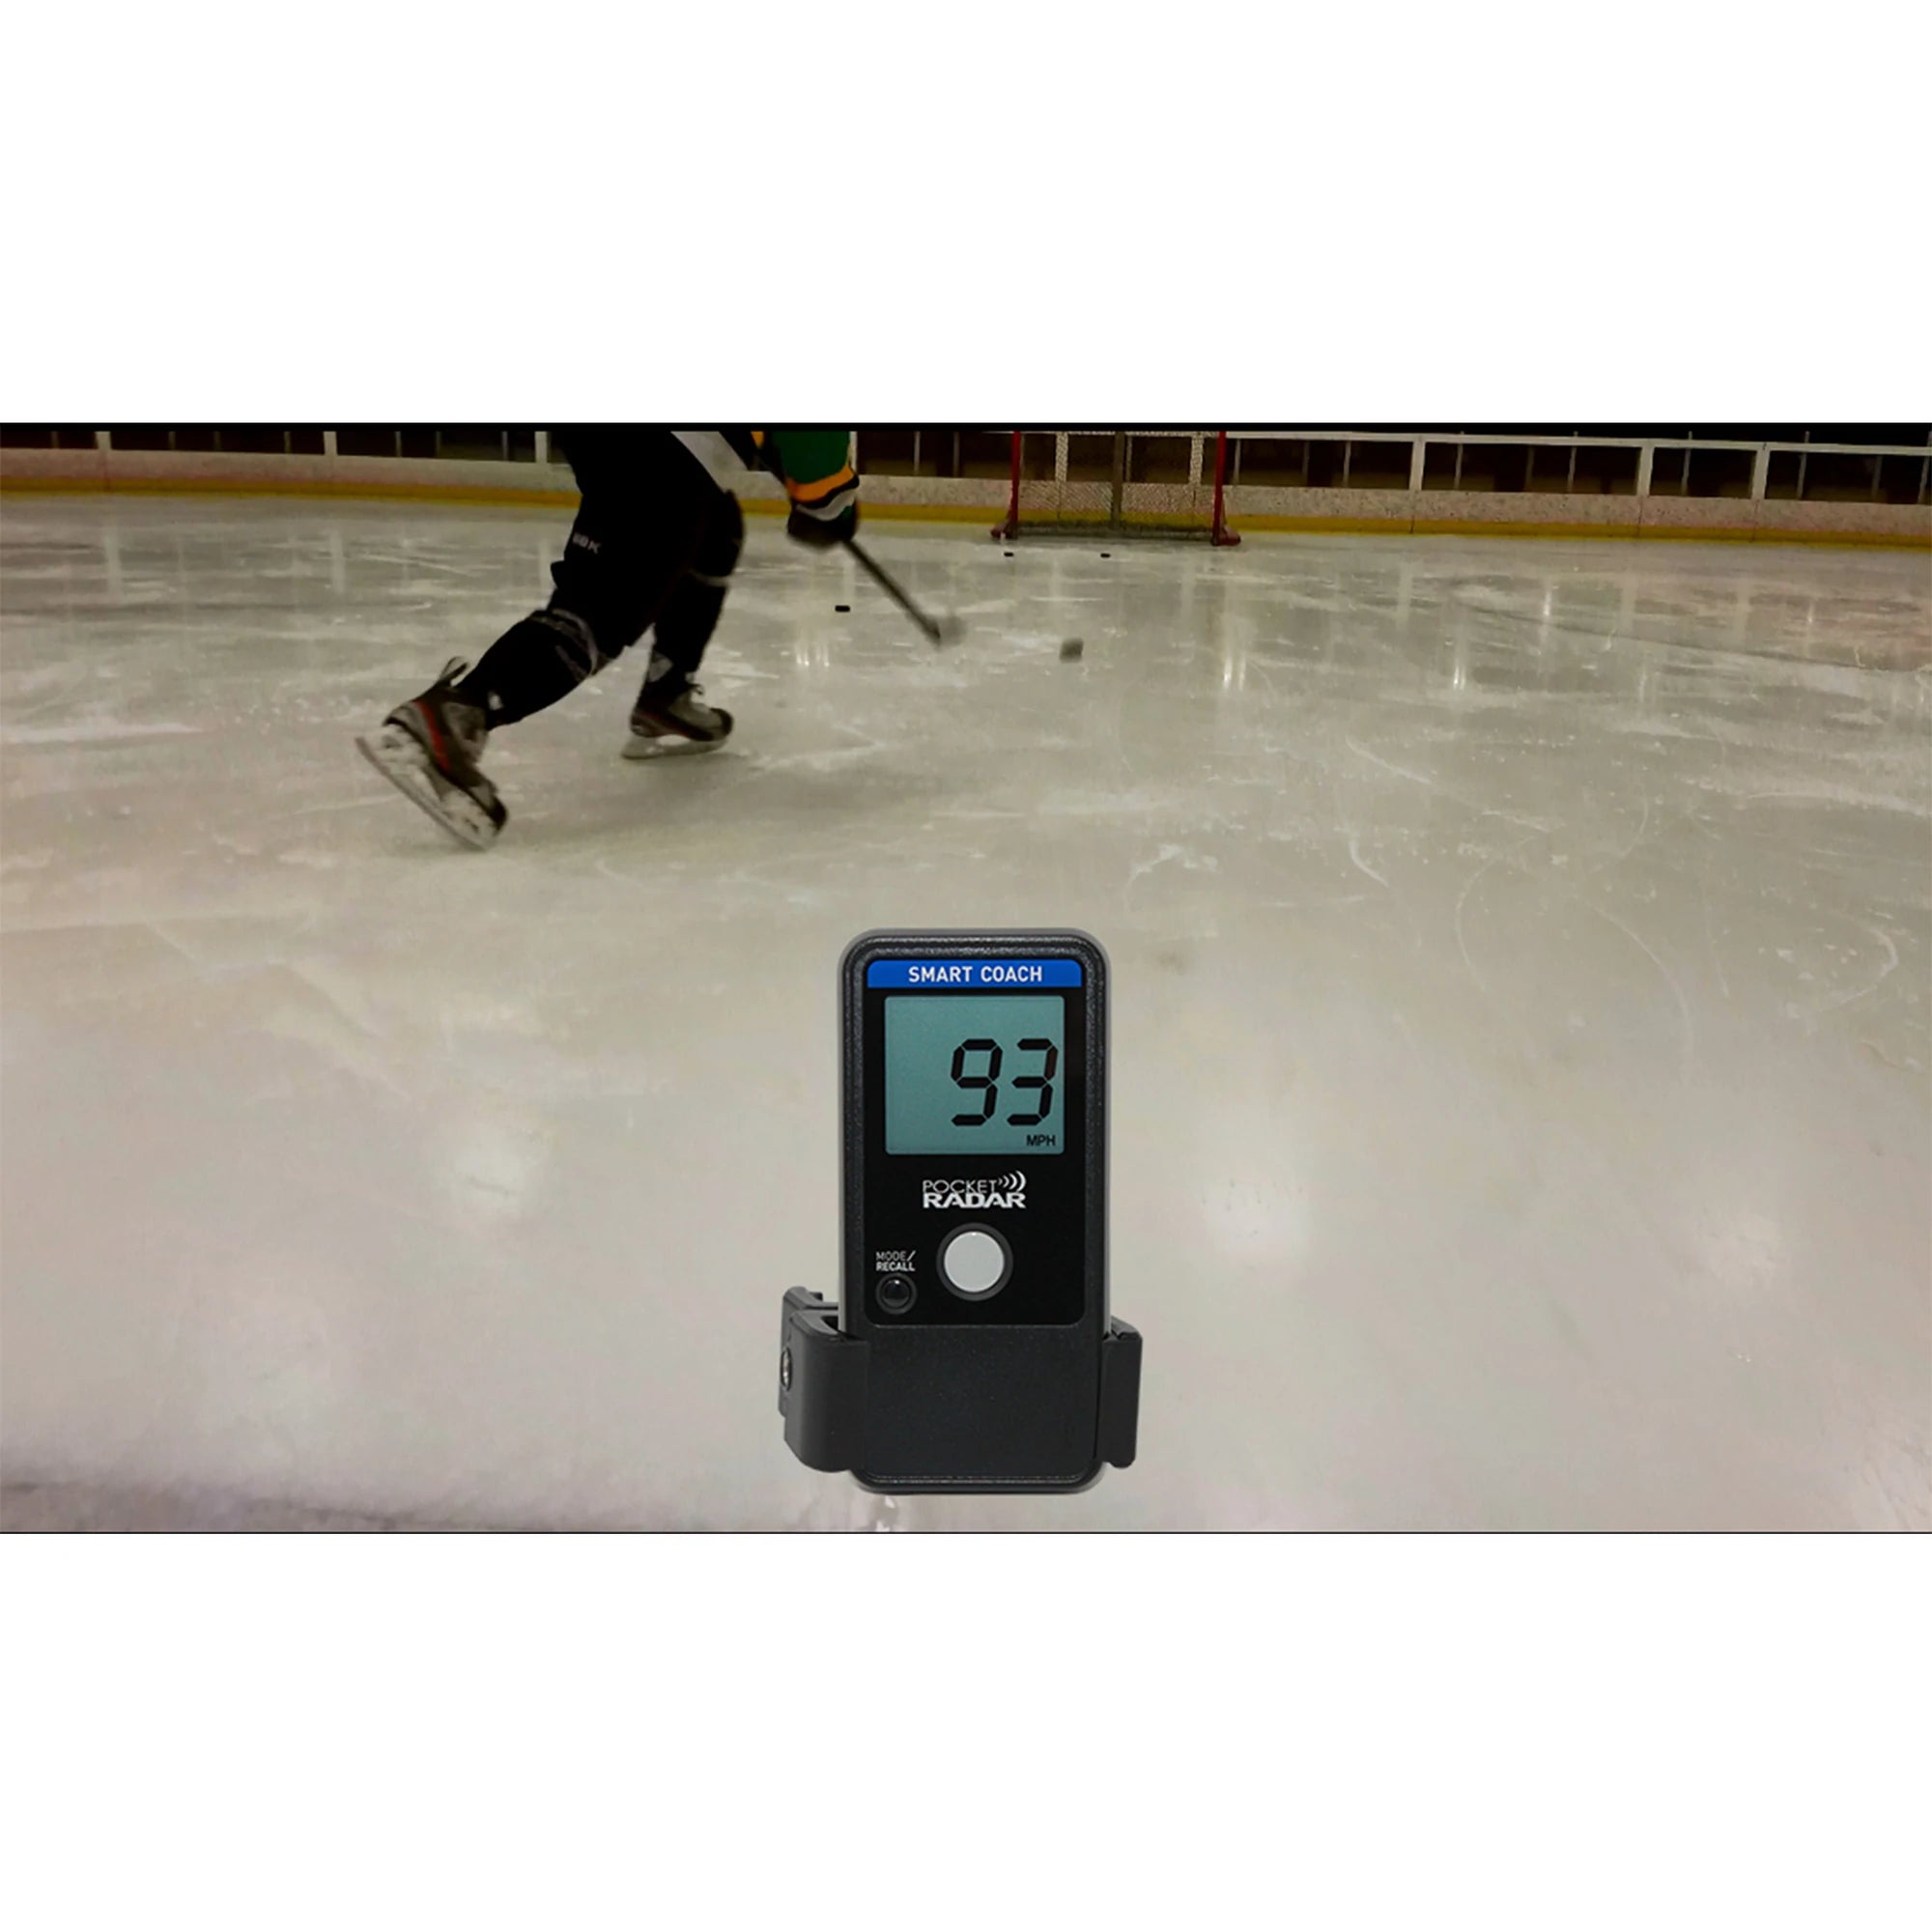 Universal Mount with Pocket Radar Used In Hockey